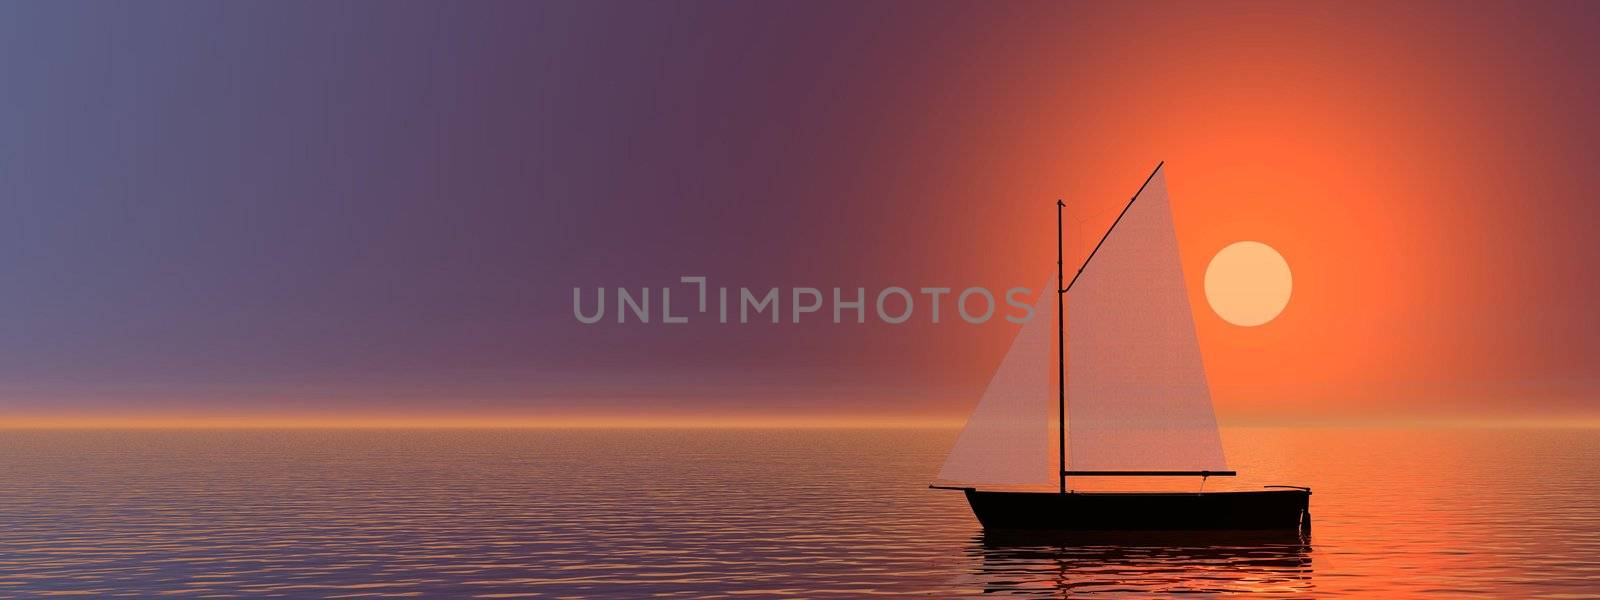 boat by mariephotos